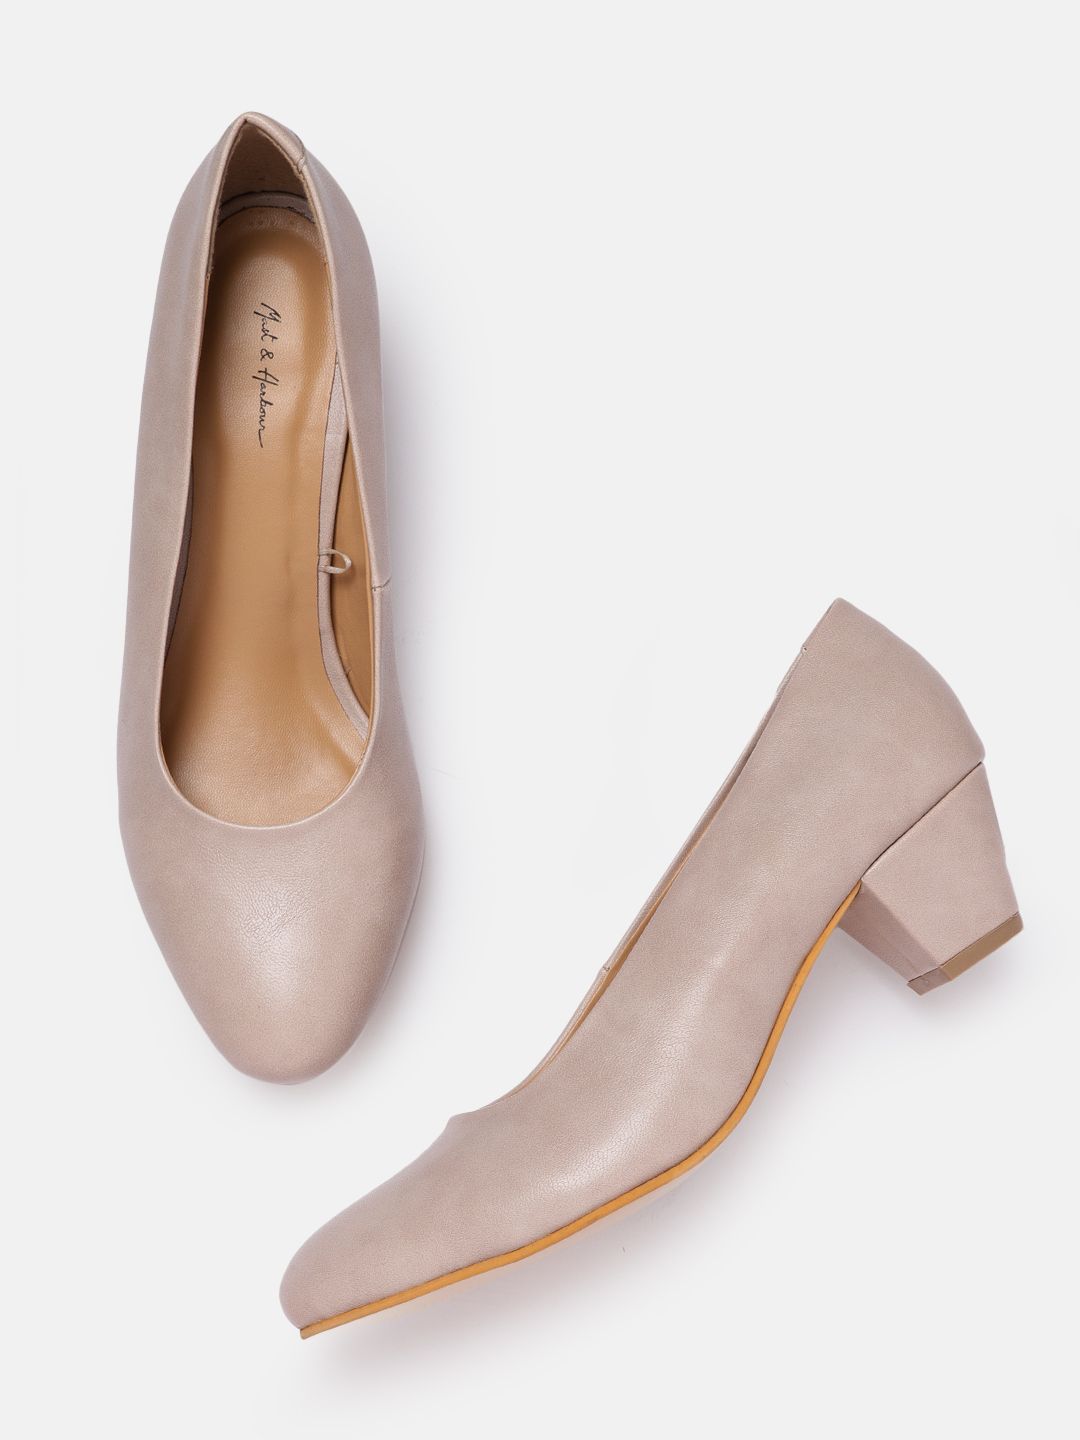 Mast & Harbour Nude-Coloured Solid Pumps Price in India